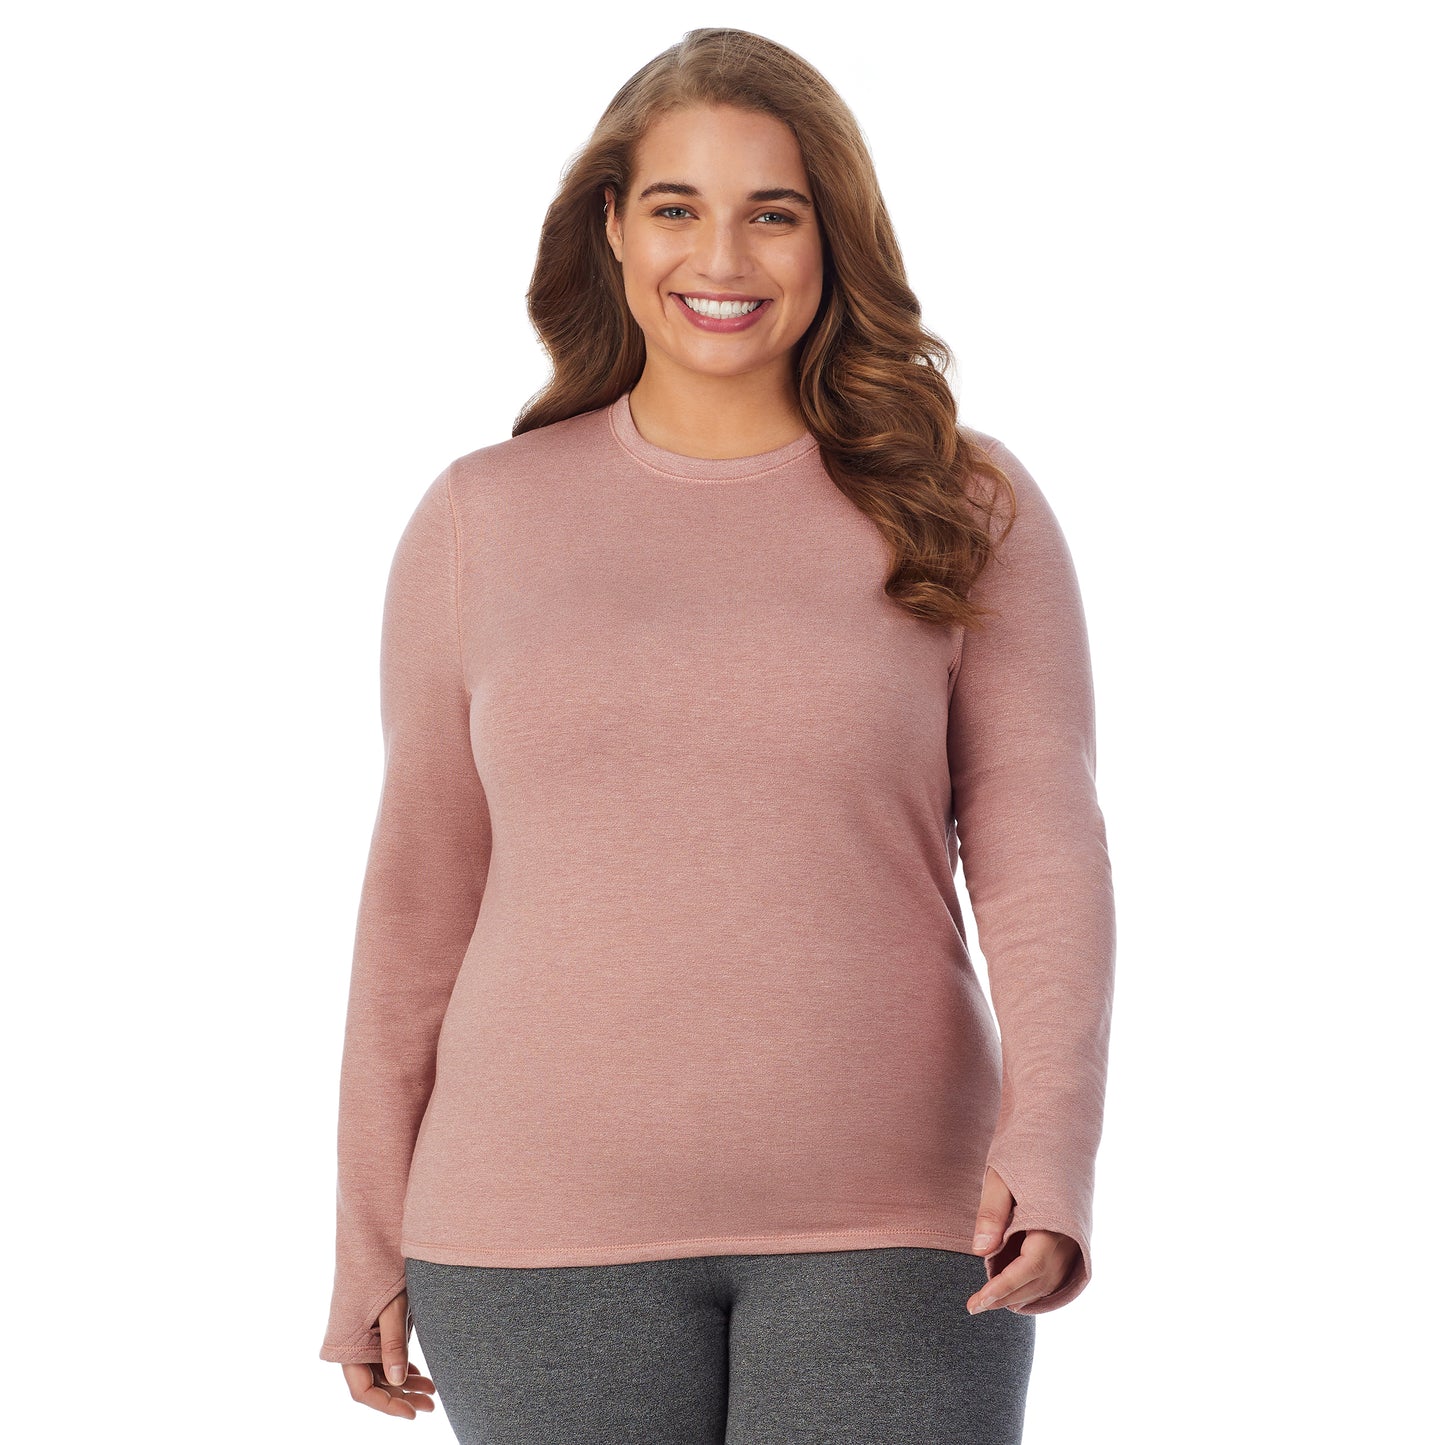 Mink Taupe Heather; Model is wearing size 1X. She is 5'7", Bust 42.5", Waist 34.5", Hips 46" @A lady wearing mink taupe heather long sleeve crew plus.